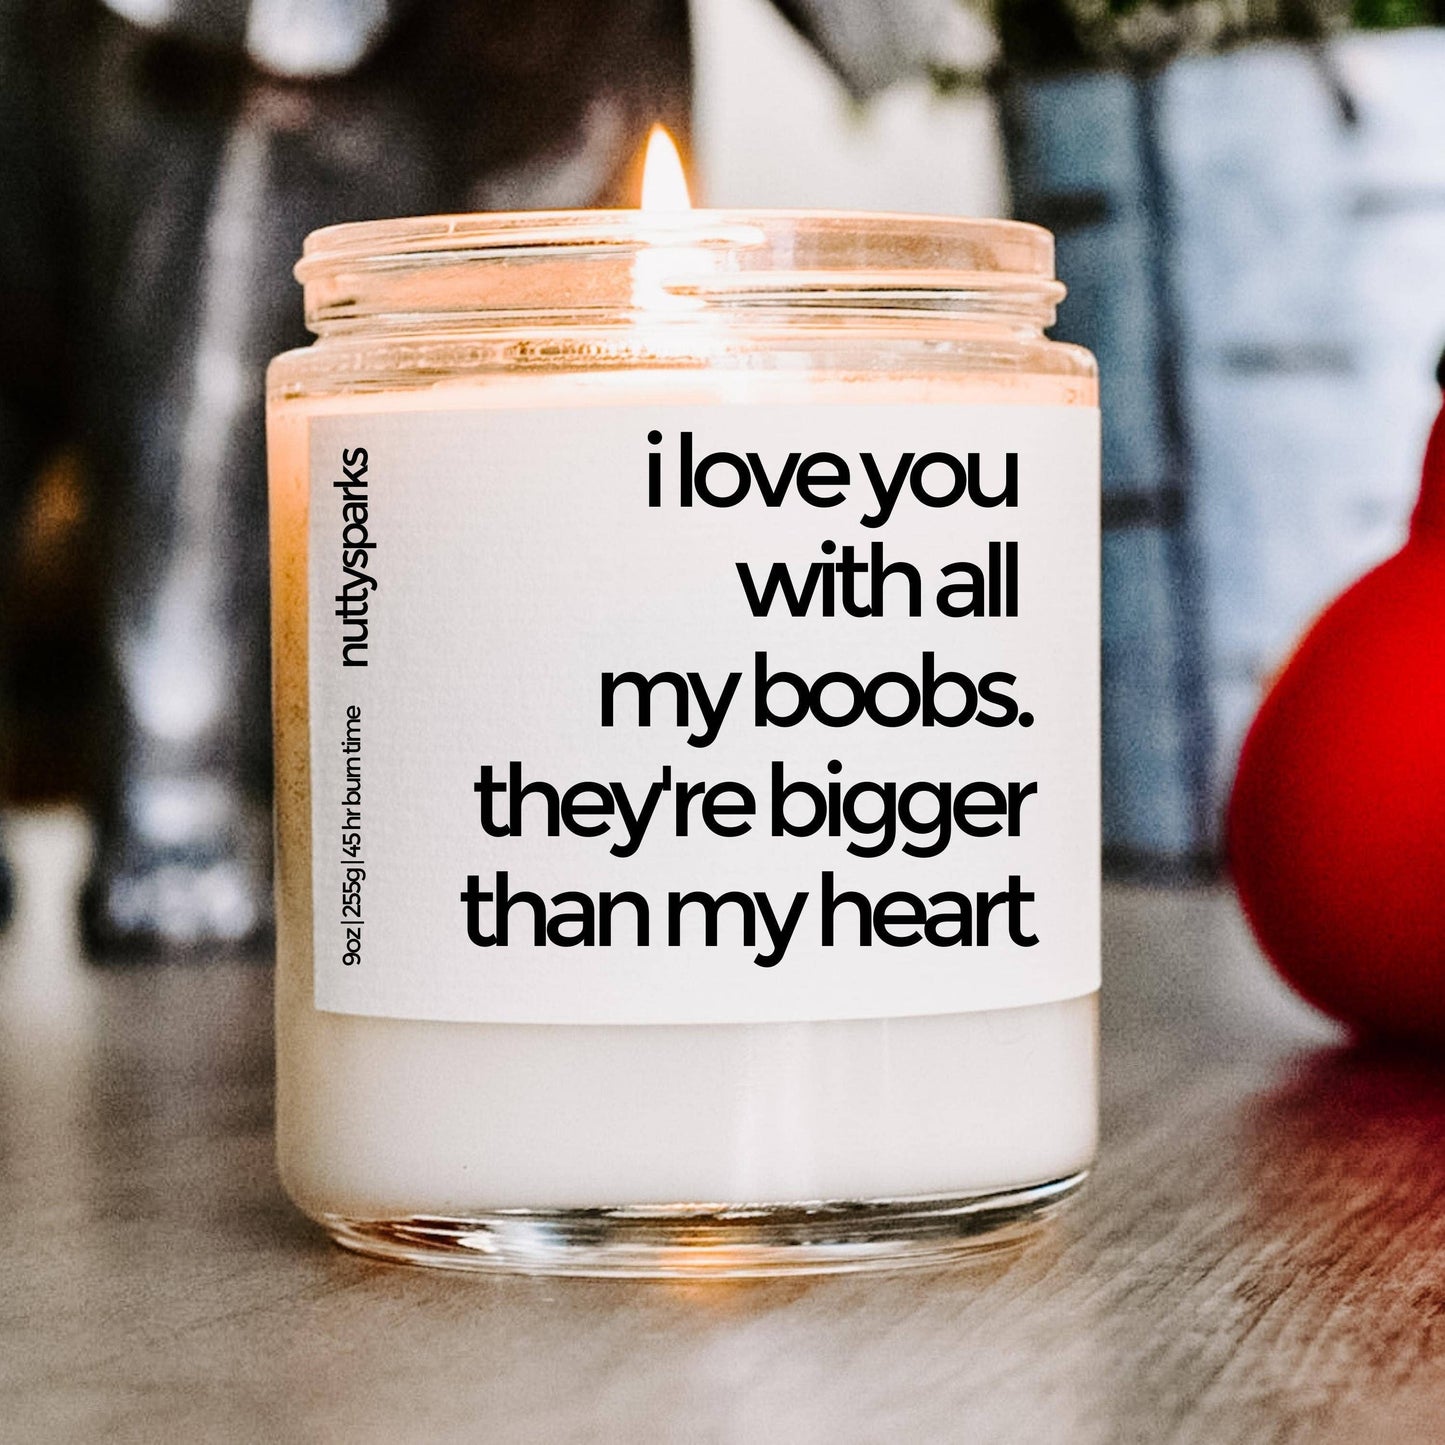 I love you with all my boobs soy candle